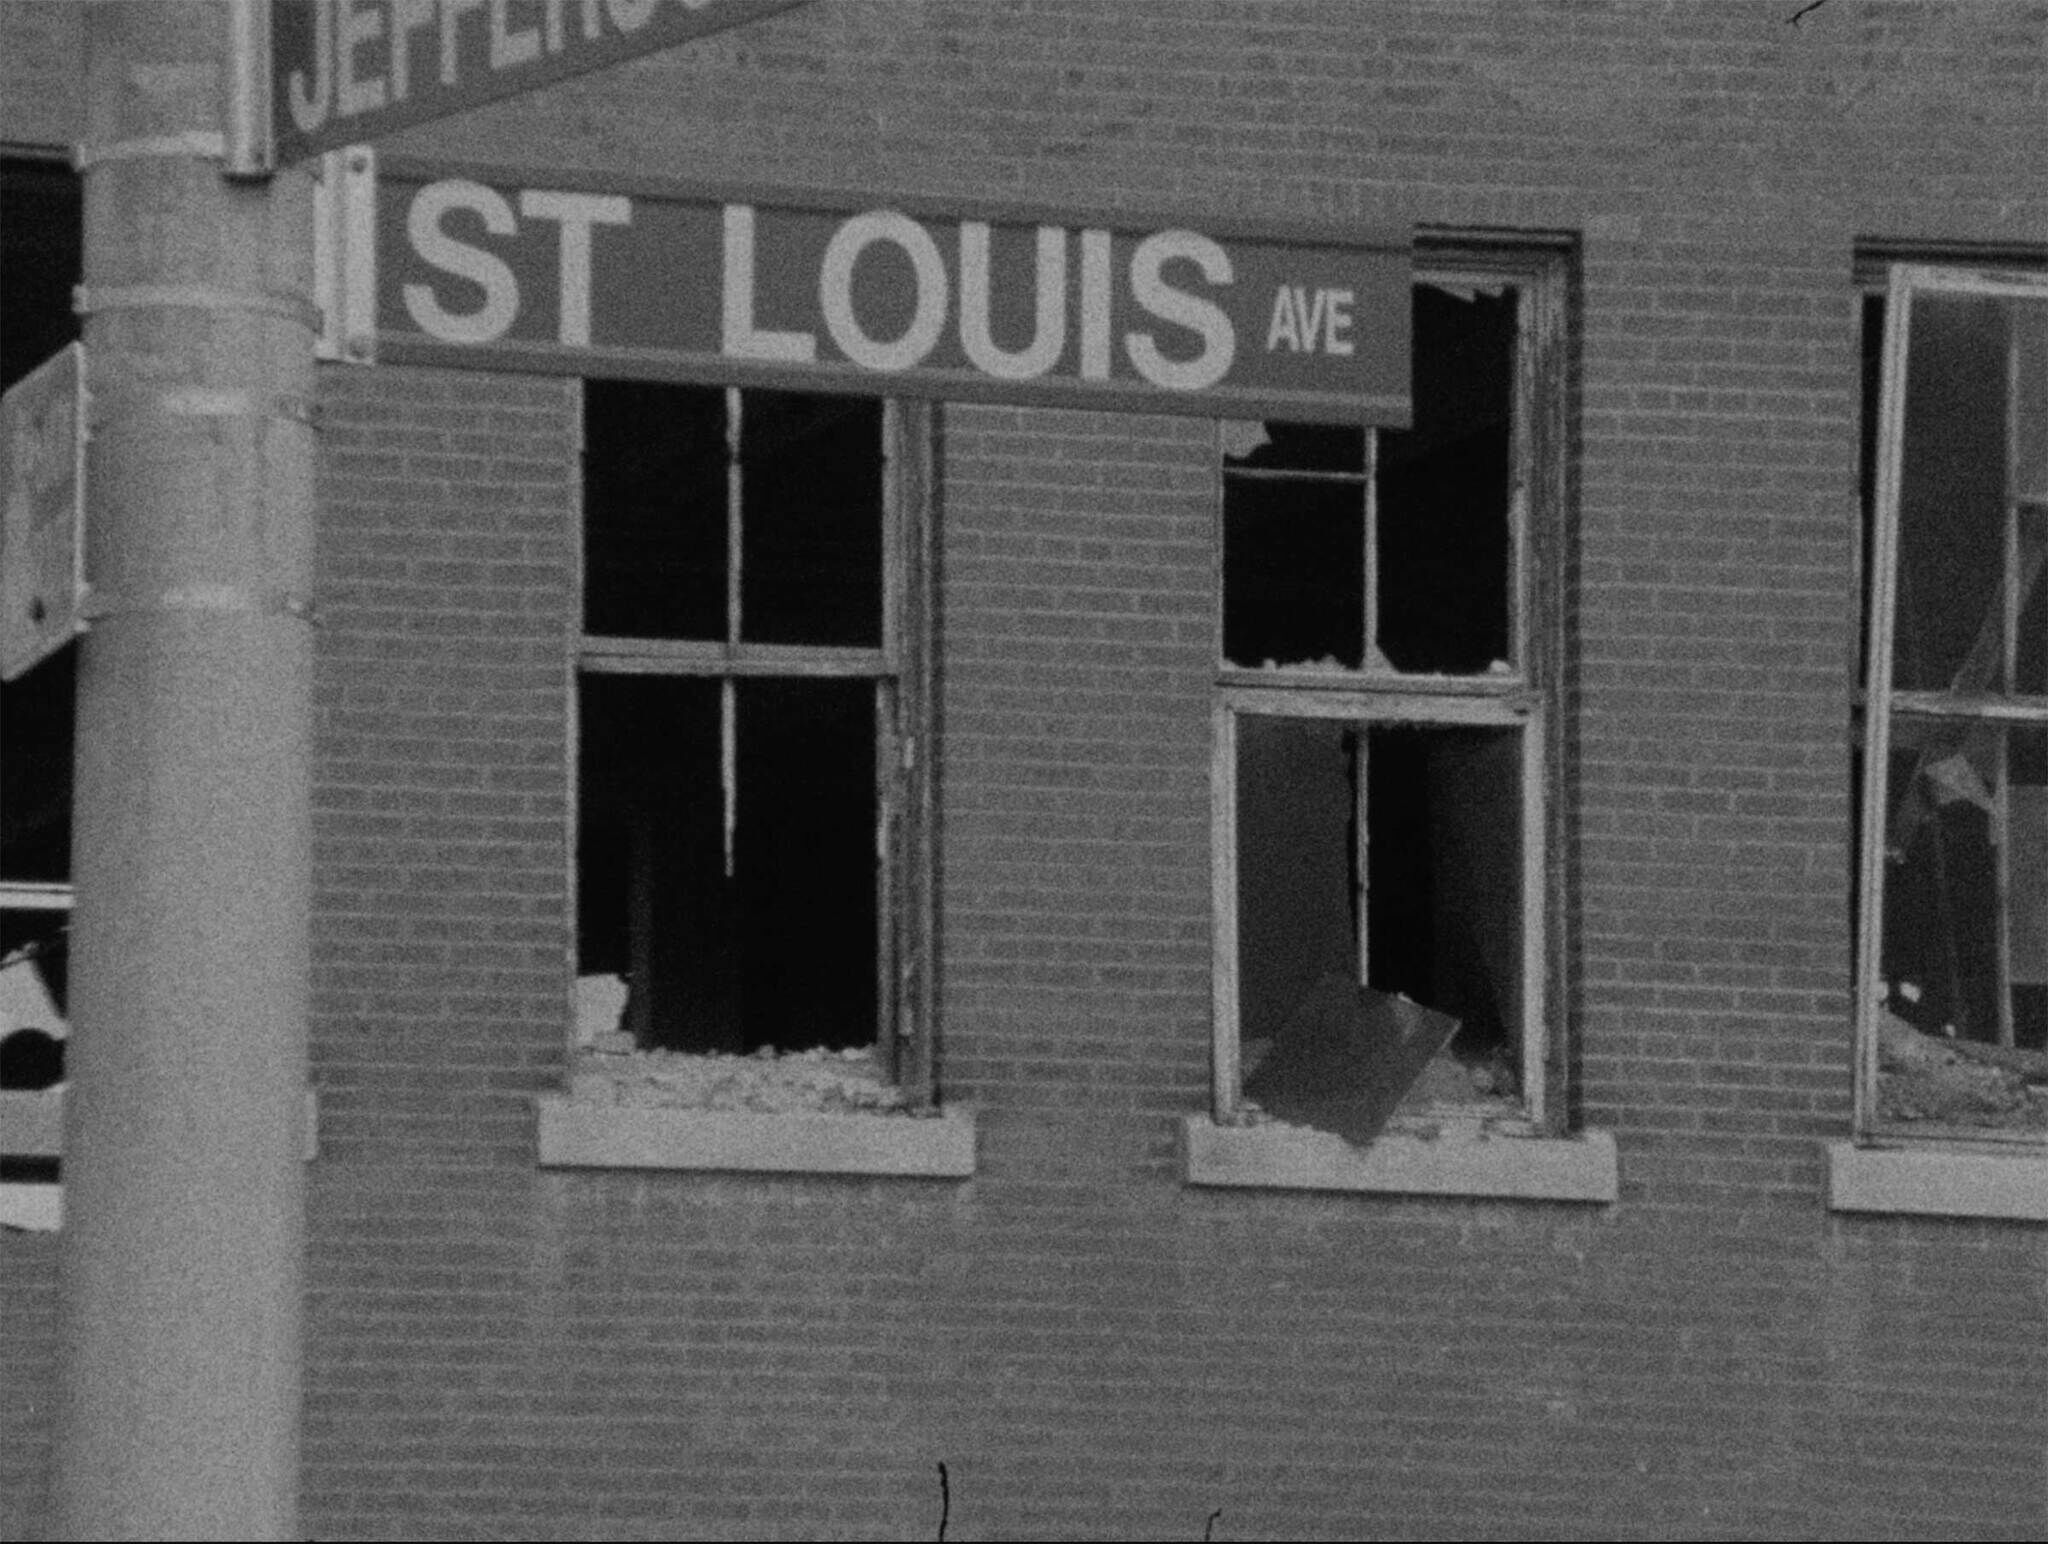 Black and white photo of a building corner with "1ST LOUIS AVE" sign, broken windows, and visible disrepair.